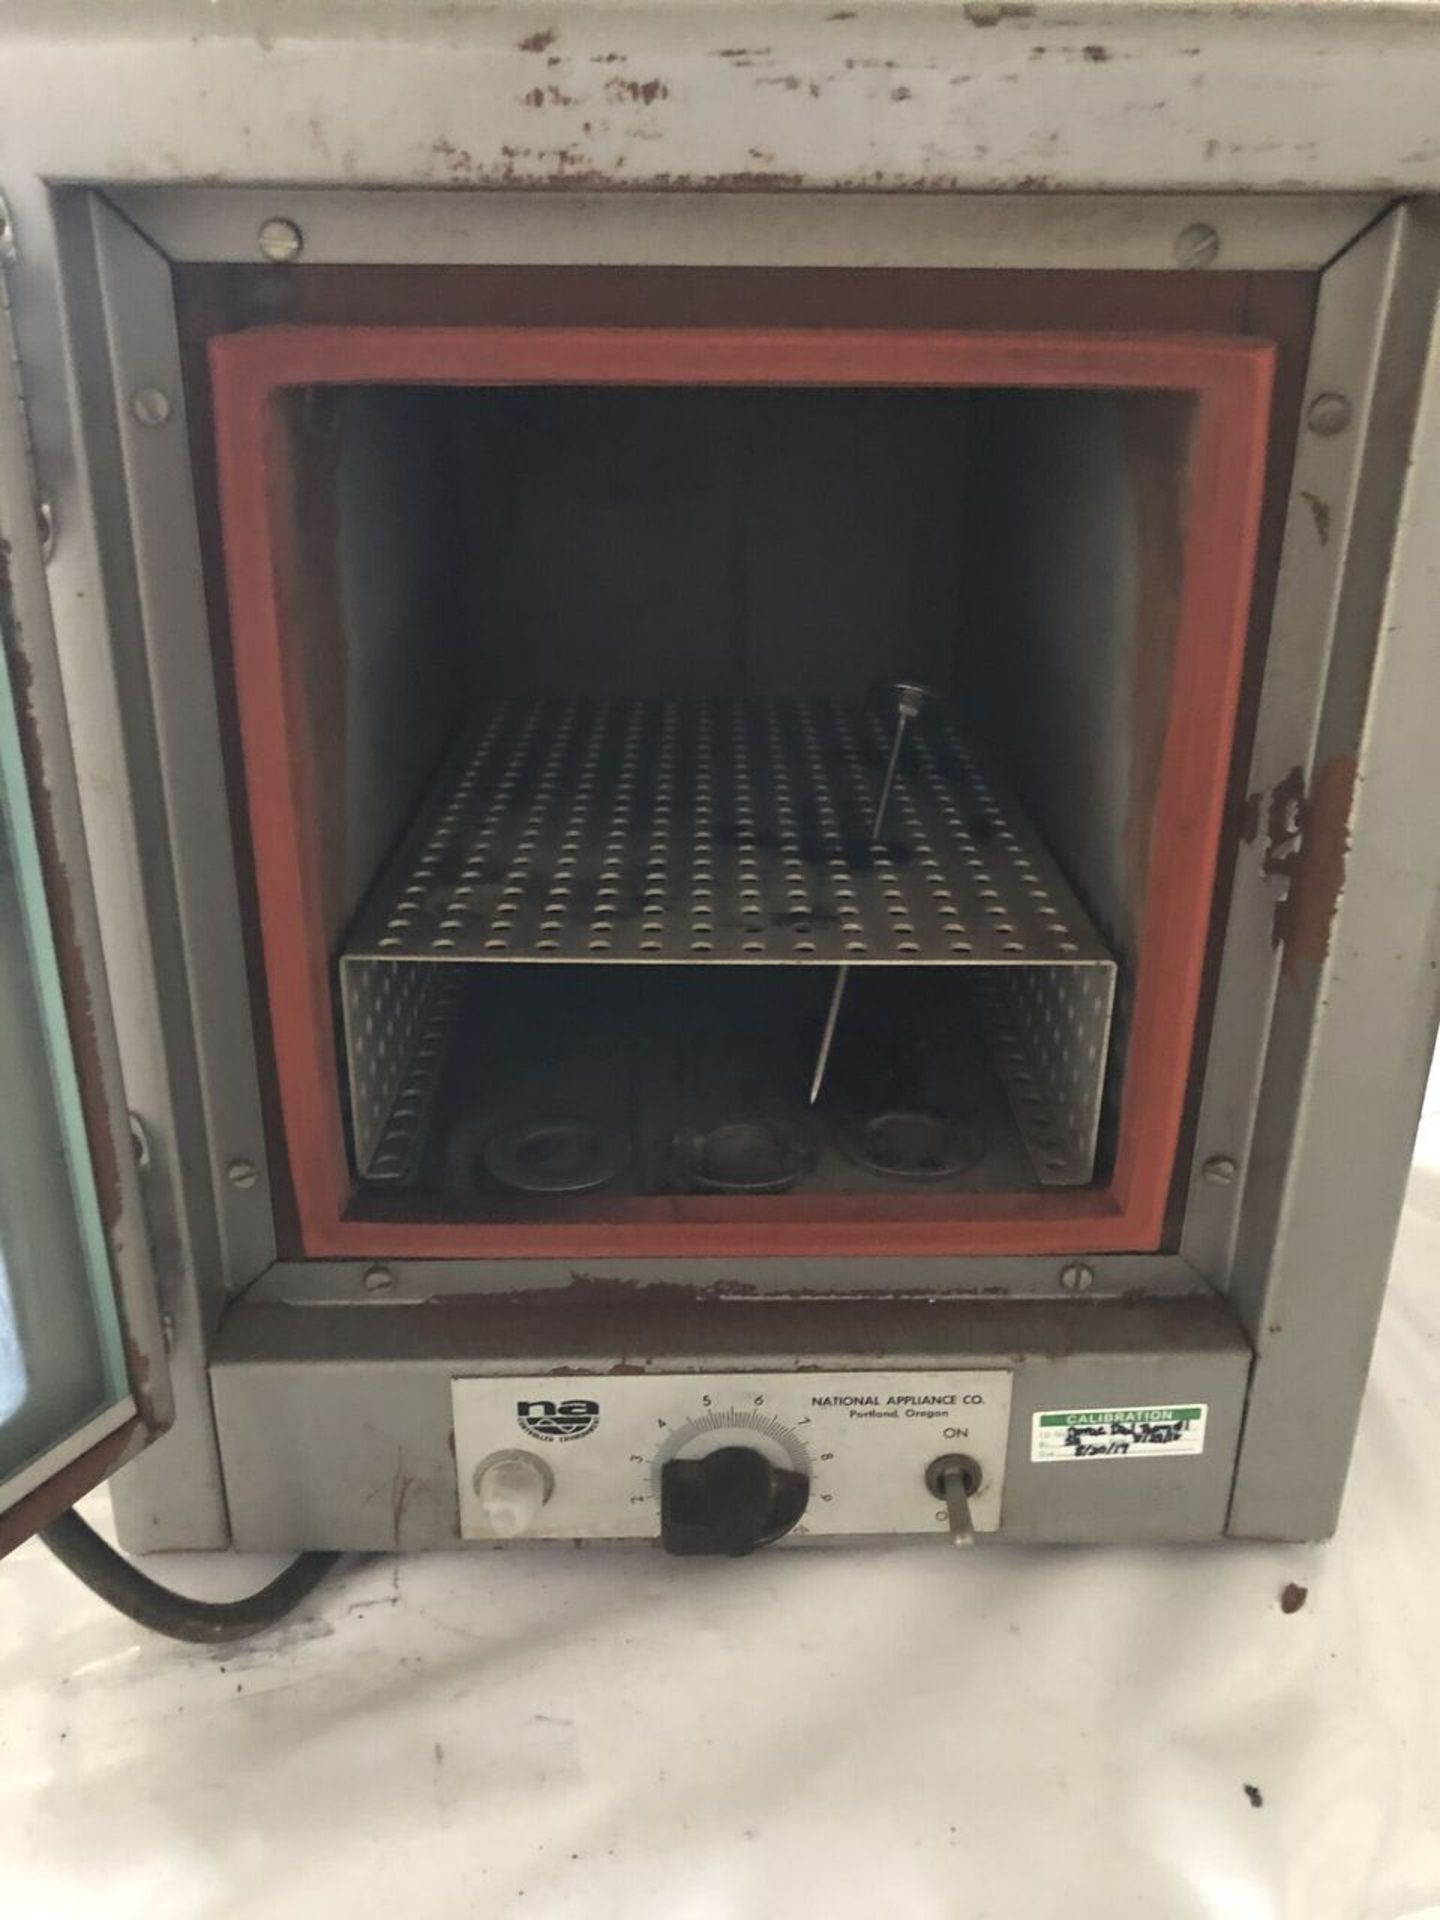 National Appliance Co. Vacuum Oven, Model #5831, S/N #SG-64, 550 Watts - Image 2 of 5